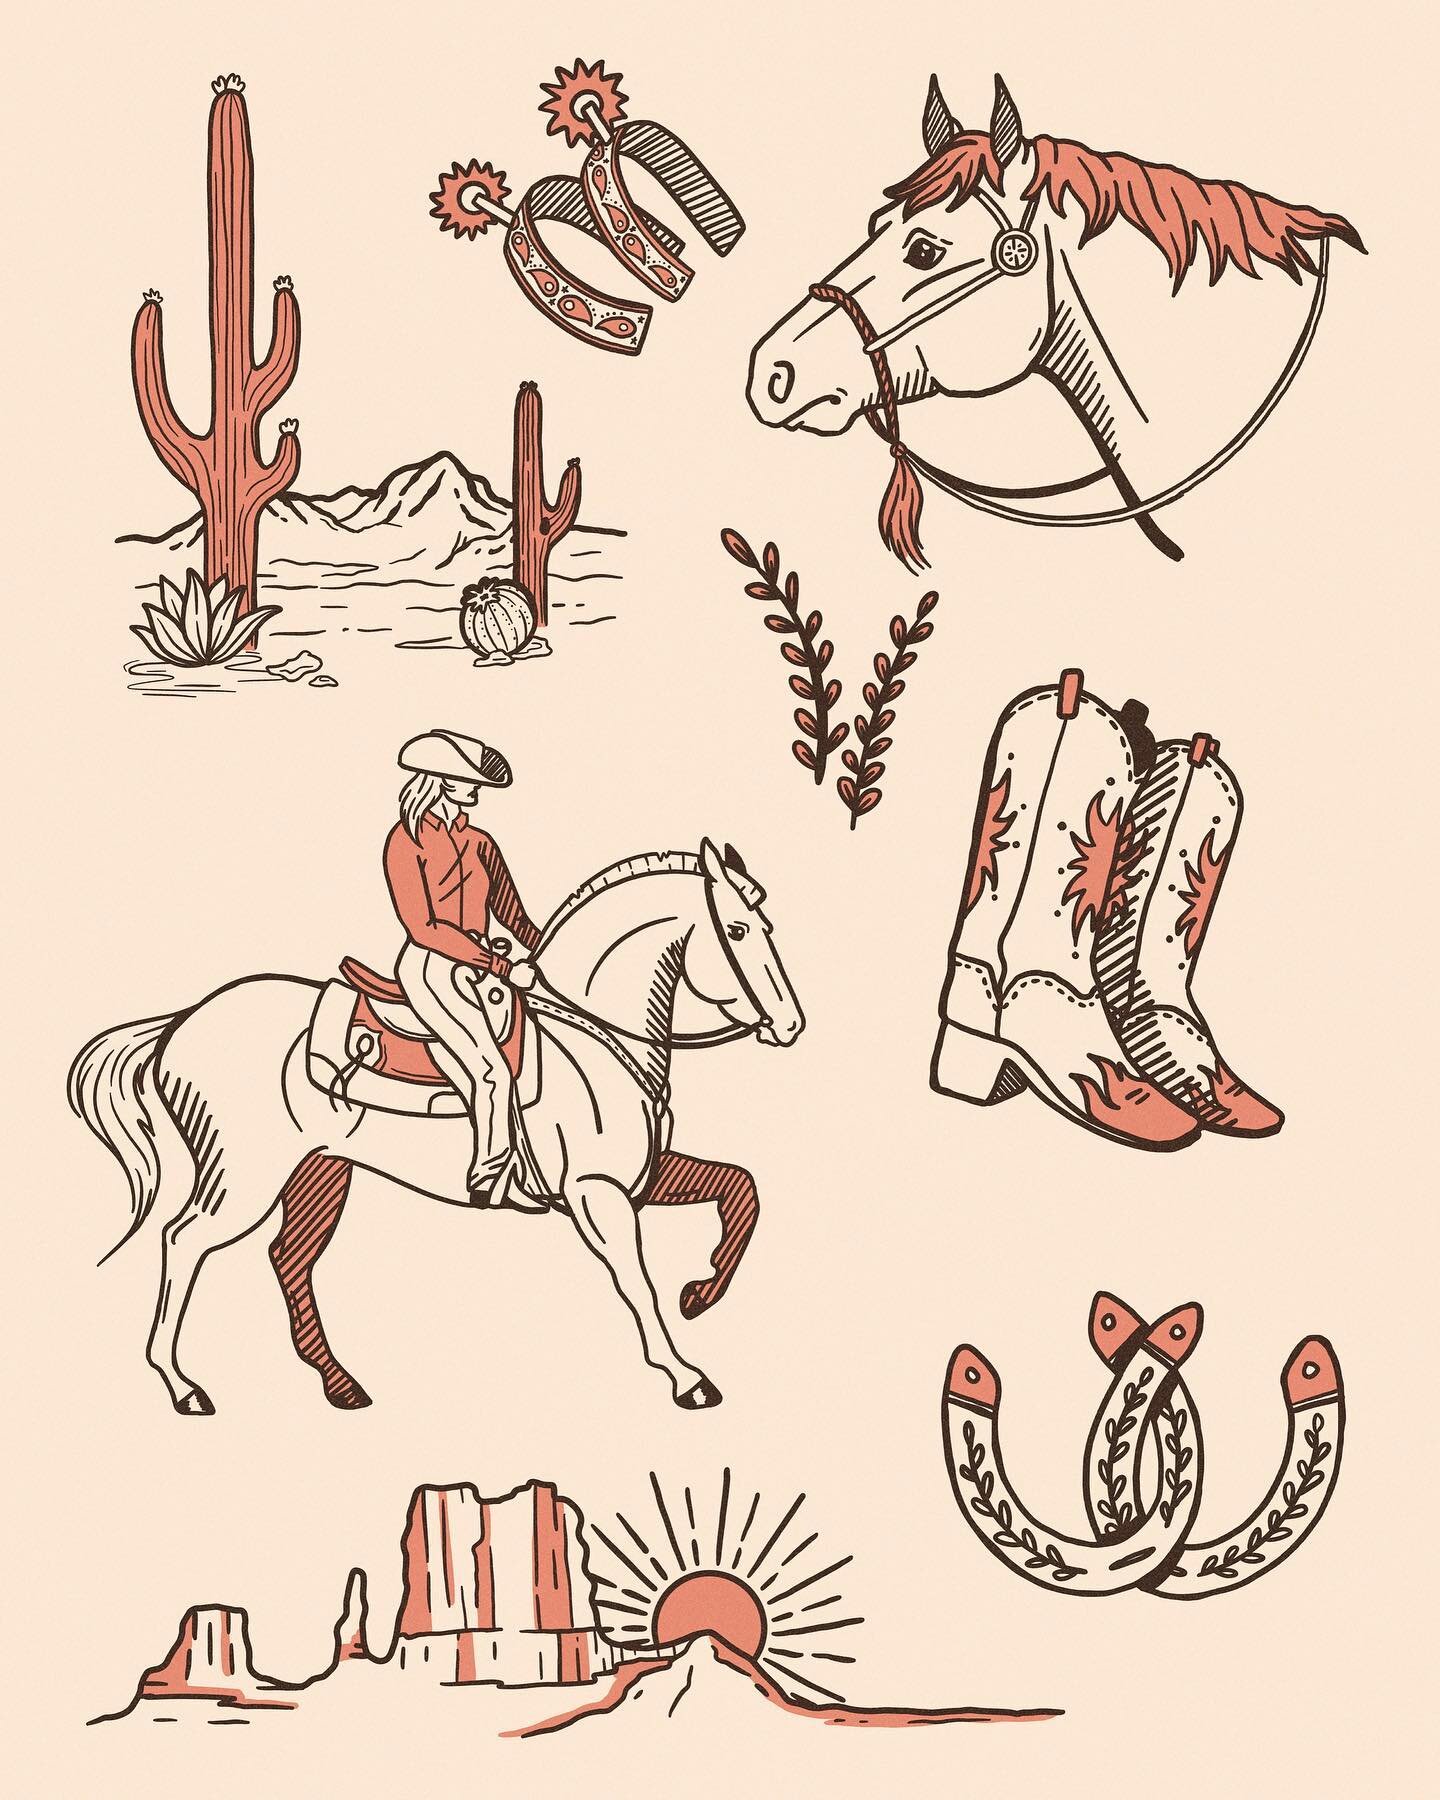 Working on some illustration packs!! Of course I had to start with a western one :))